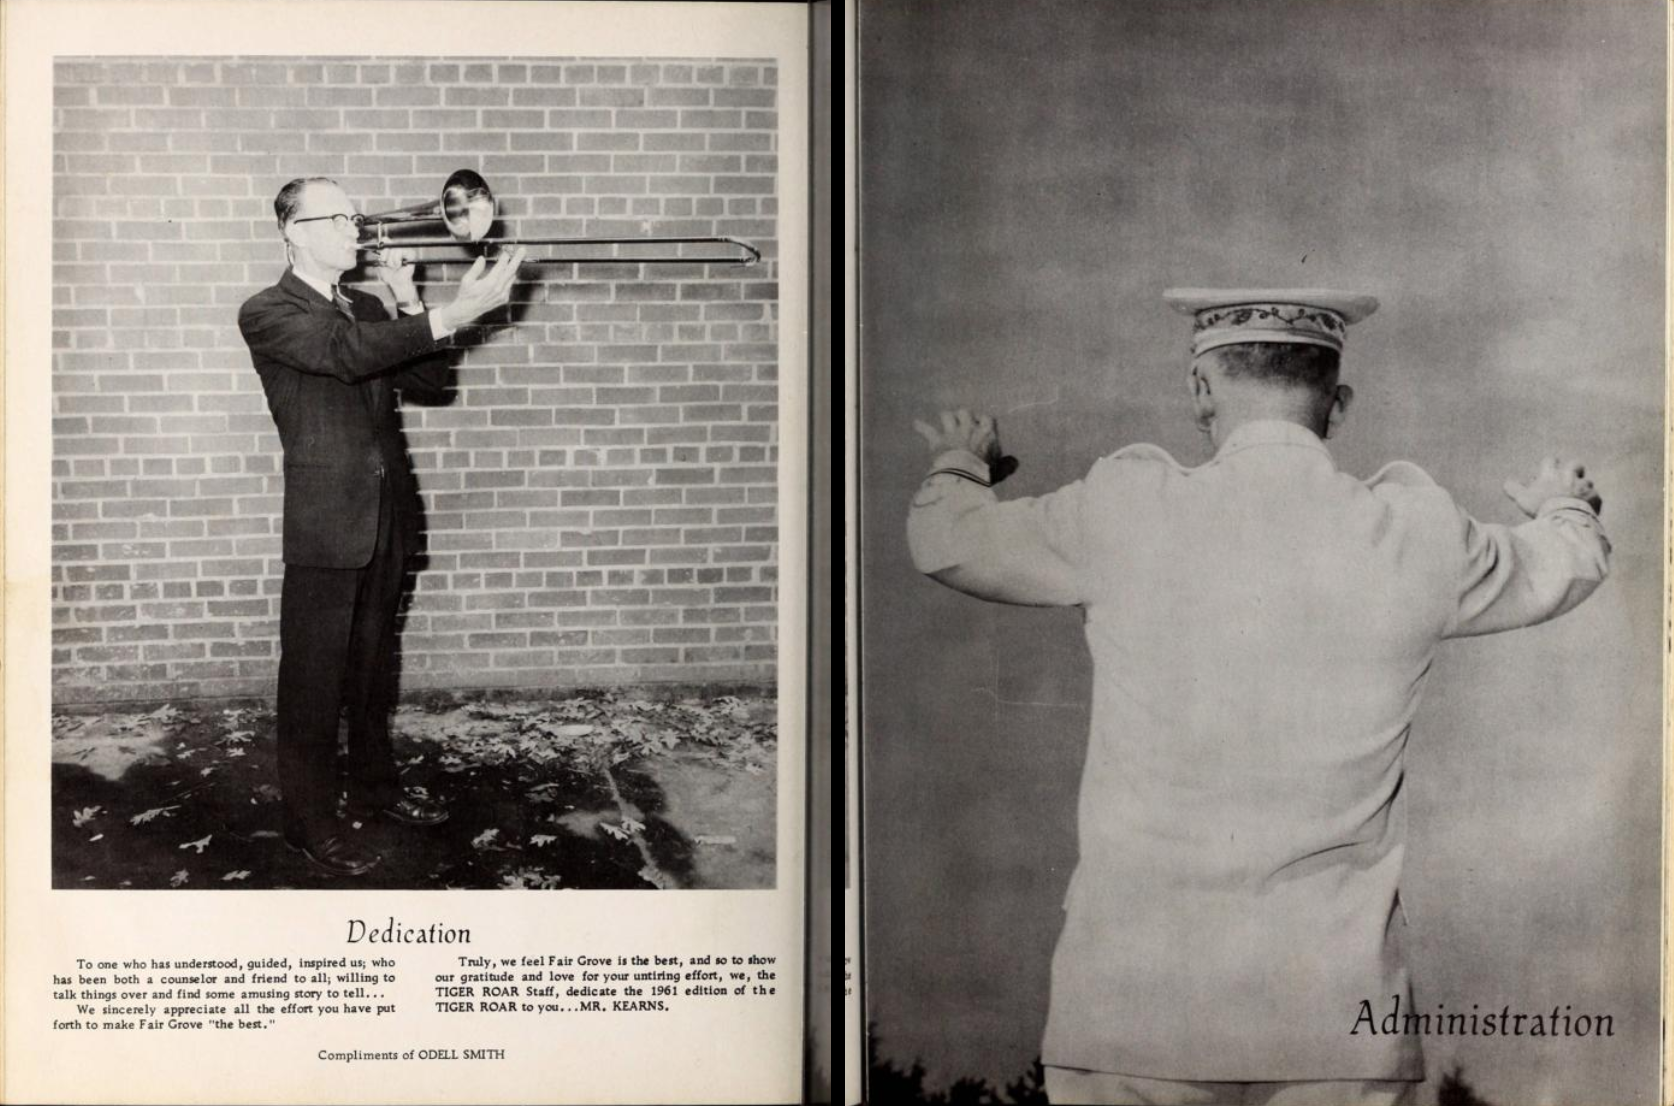 Two-page layout from the 1961 Fair Grove High School yearbook, Tiger Roar. The left page is a dedication to Mr. Kearns, who is photographed playing a brass instrument. The right page is a photo of the back of a conductor with the text "administration".